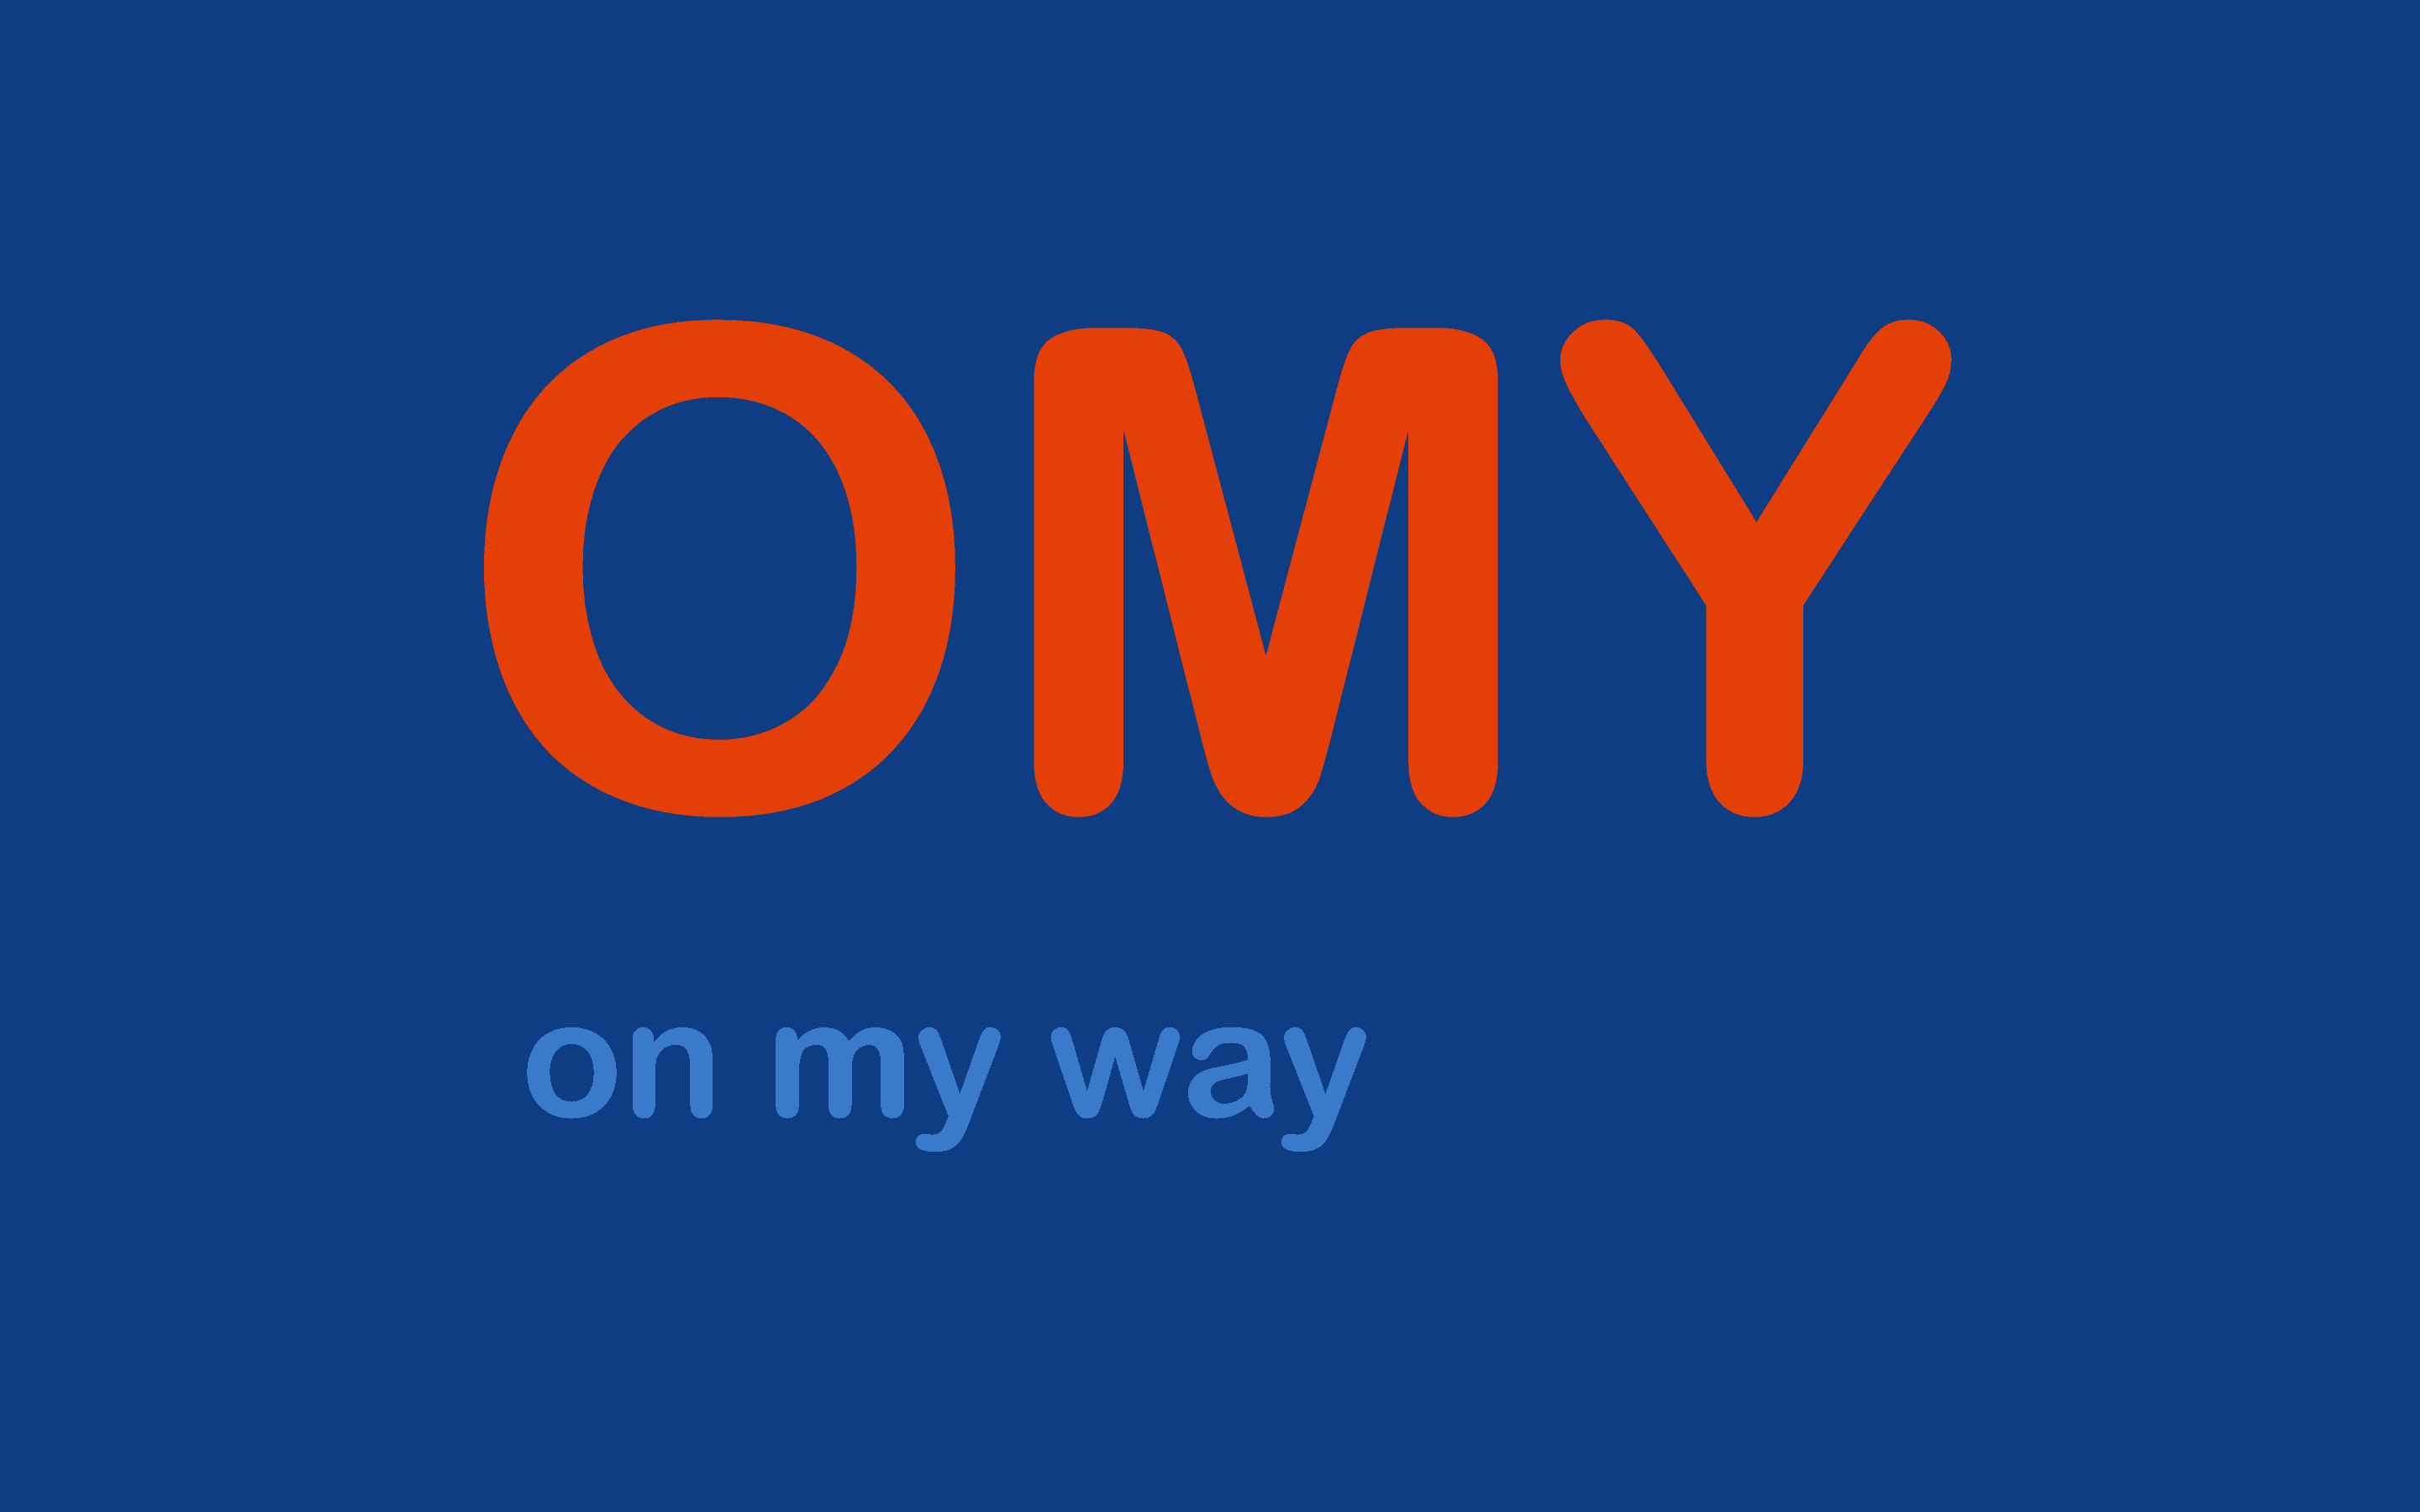 What Does OMY Mean And How Do I Use It Online?